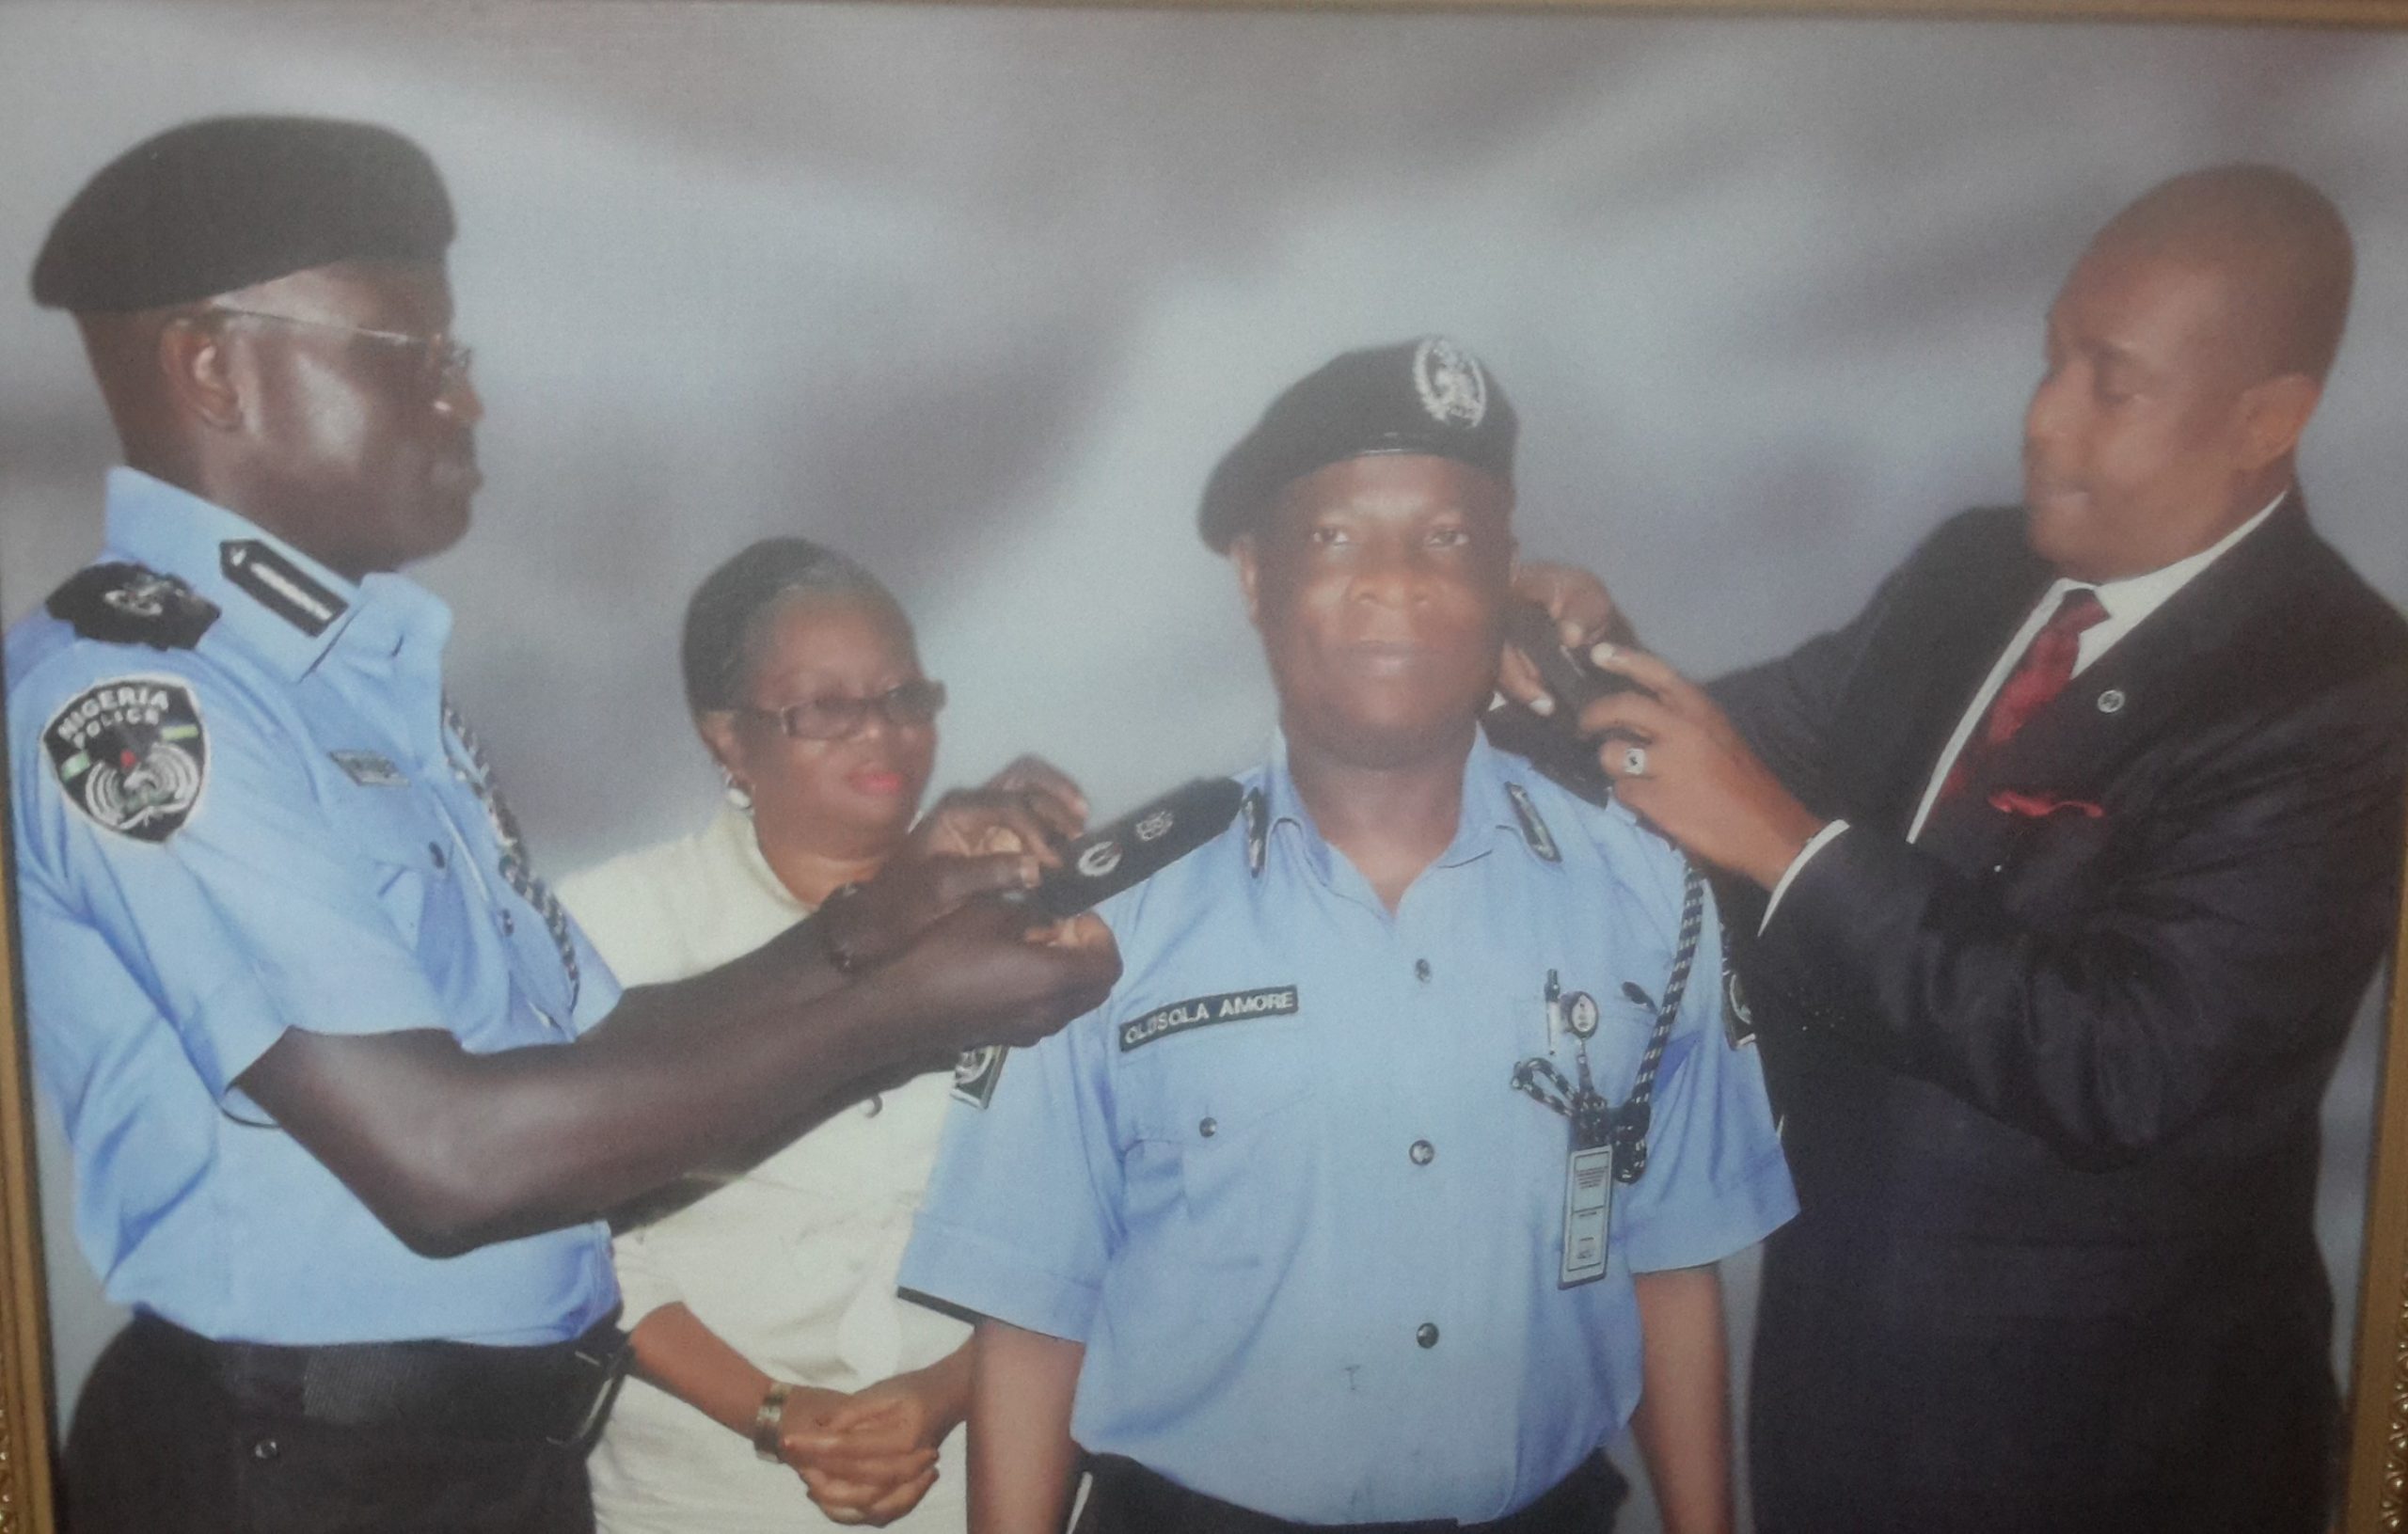 CP OLUSOLA AMORE BEING DECORATED BY IGP ABBA AND IGP ARASE AS CP.